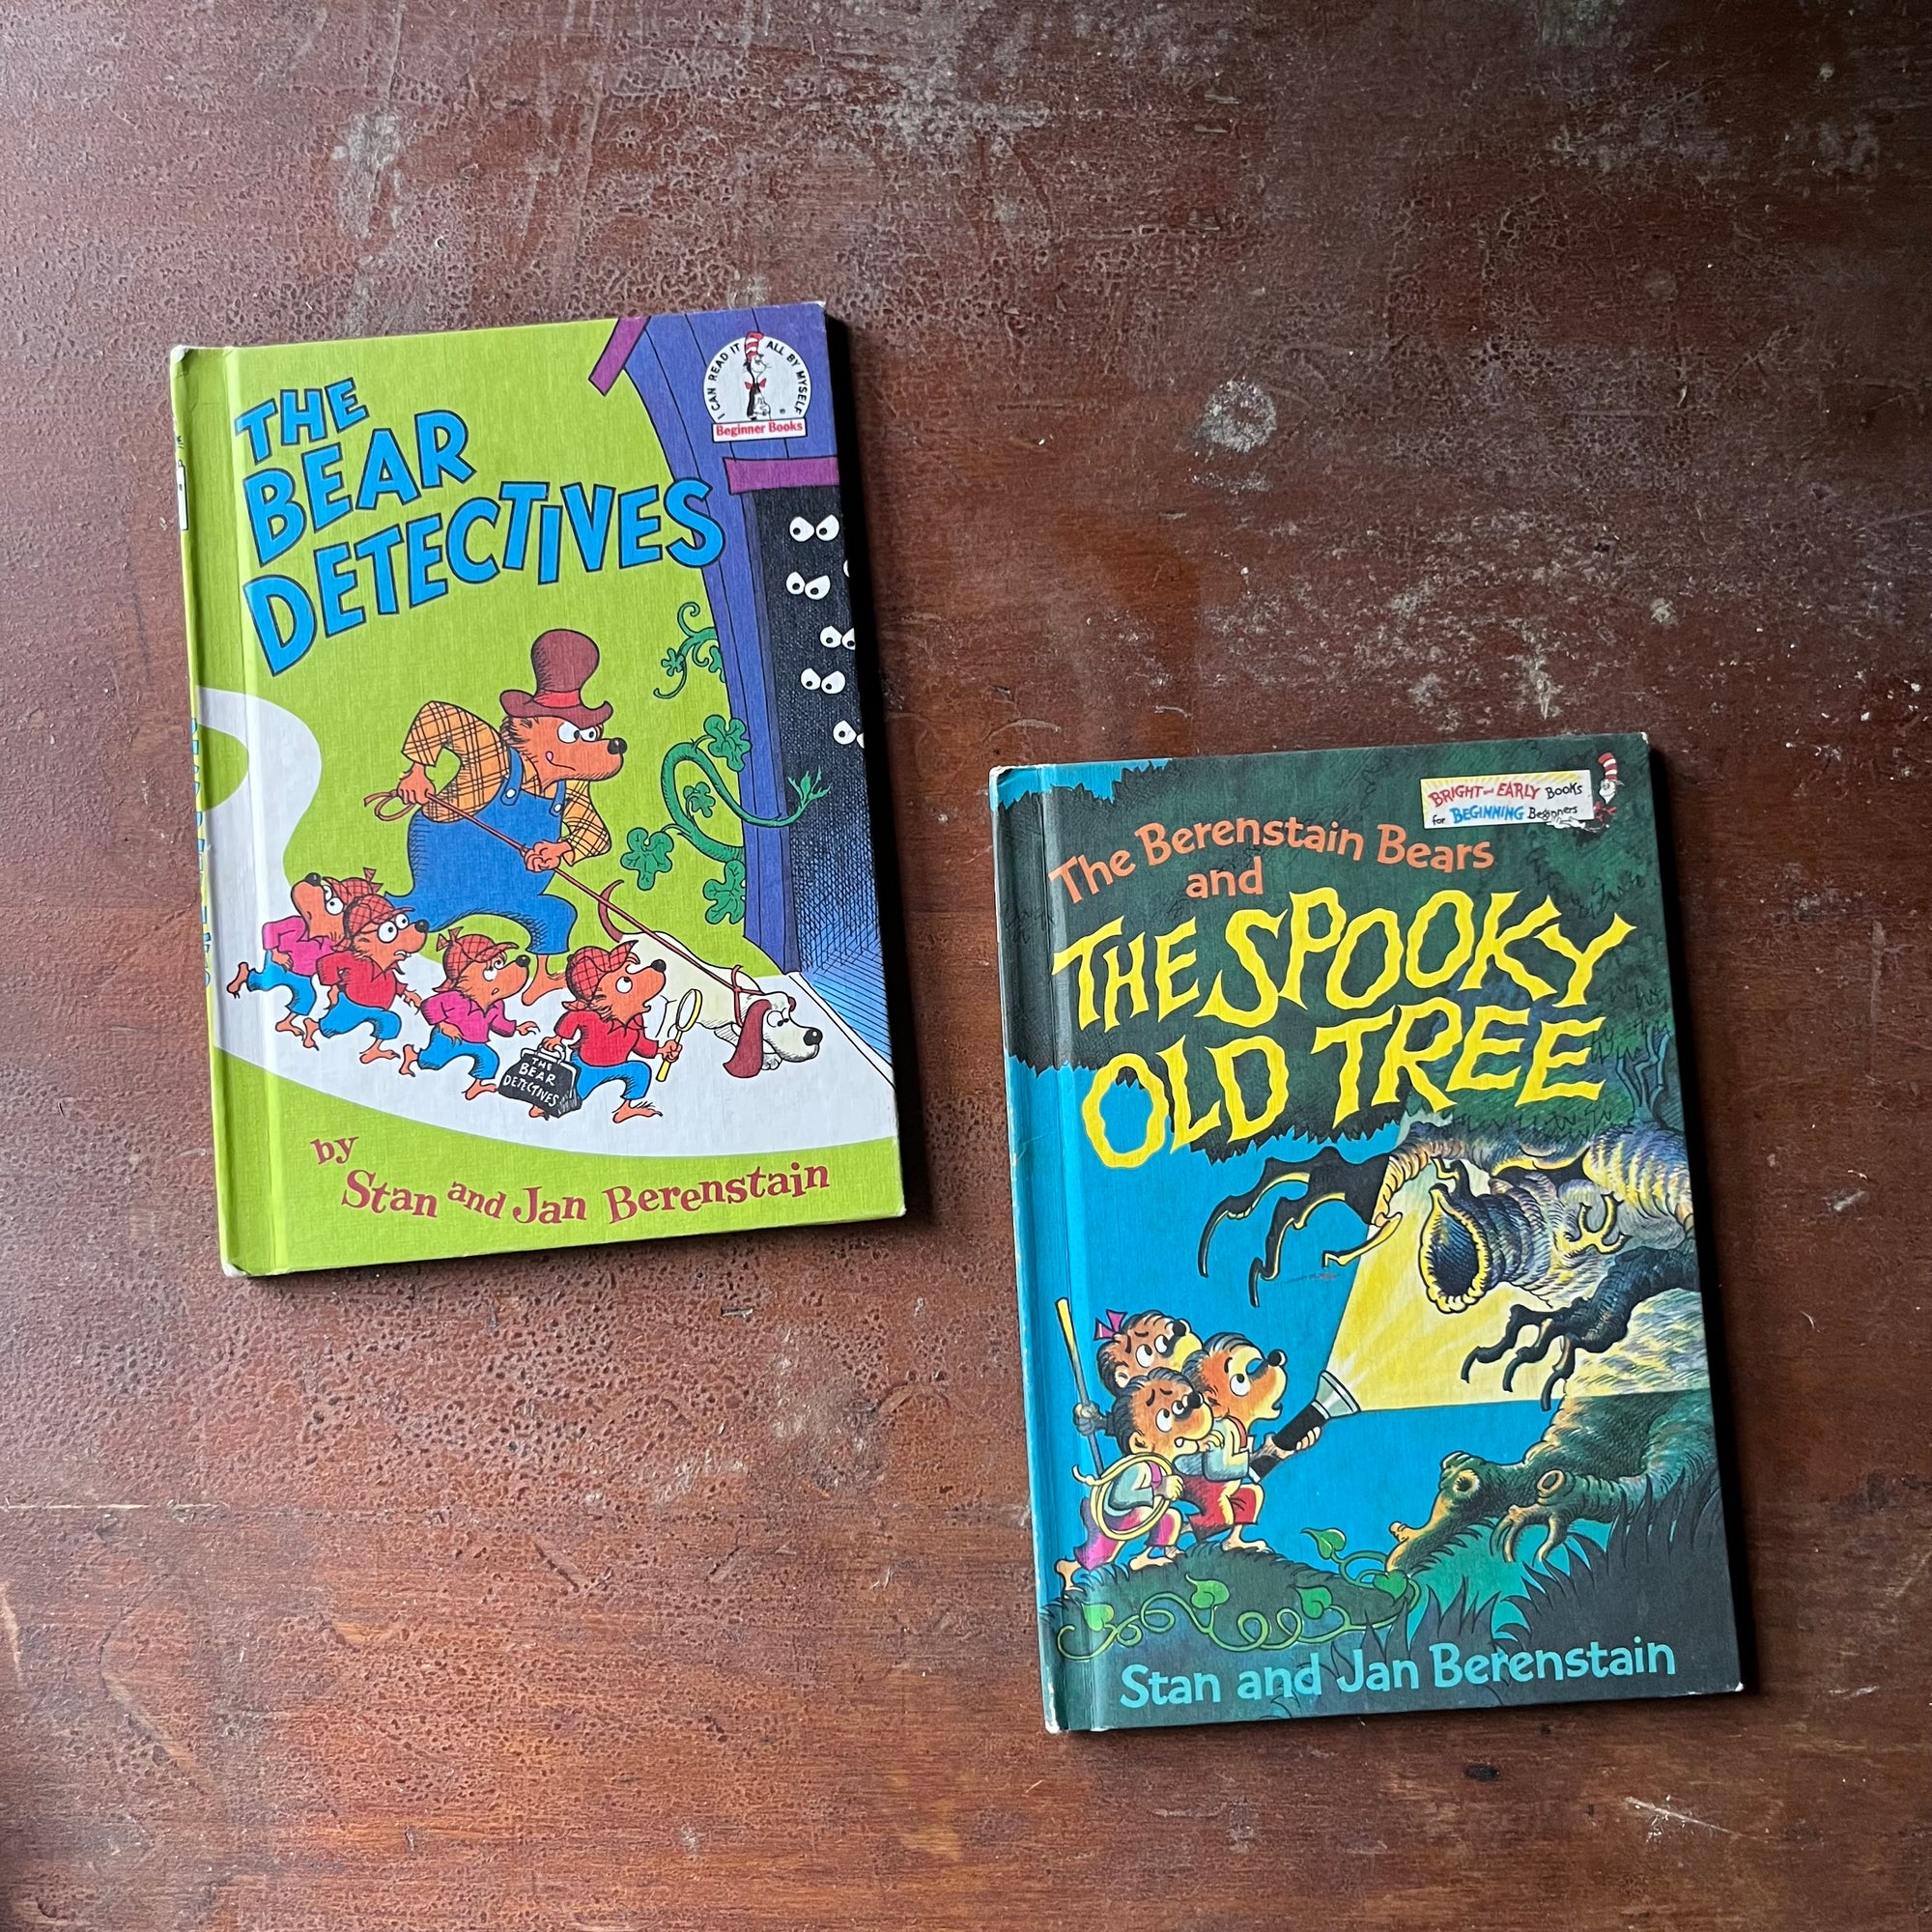 Pair of Berenstain Bears Books:  The Bear Detectives and The Spooky Old Tree by Stan & Jan Berenstain